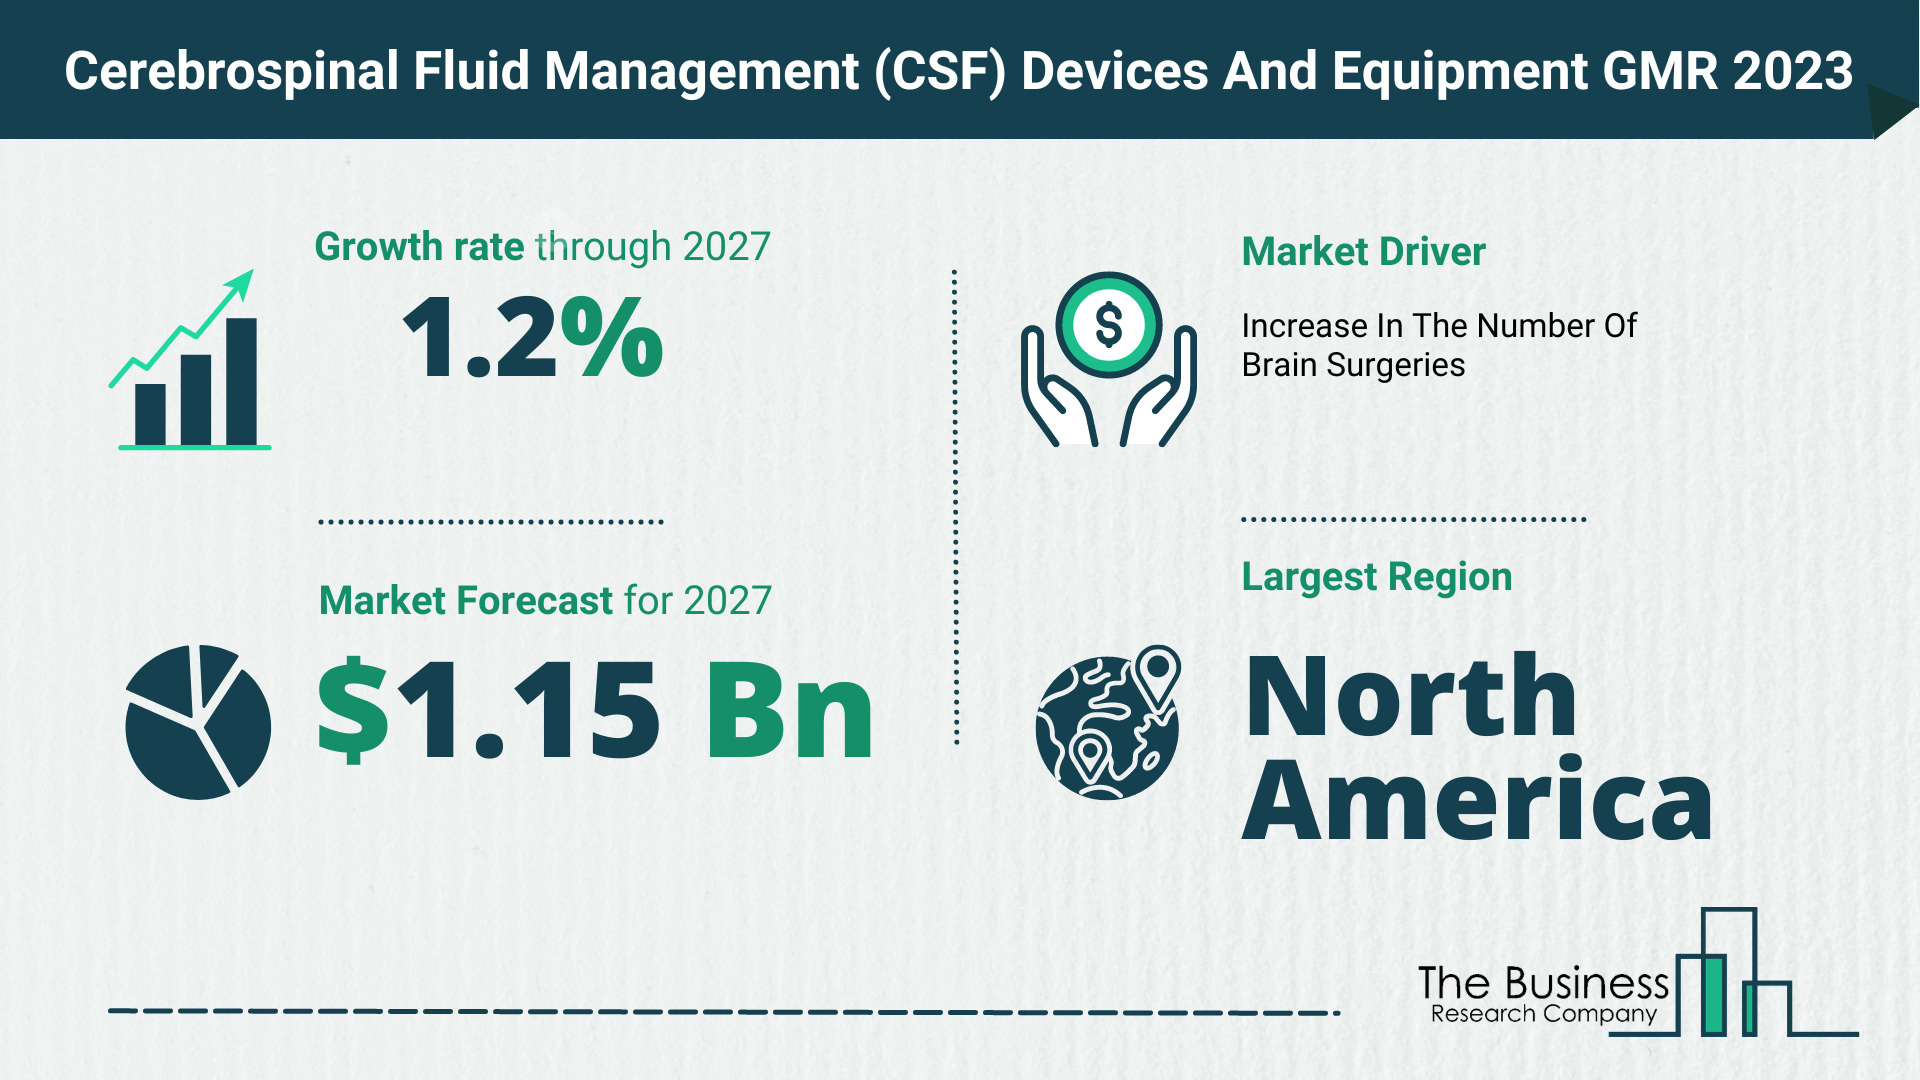 Global Cerebrospinal Fluid Management (CSF) Devices And Equipment Market